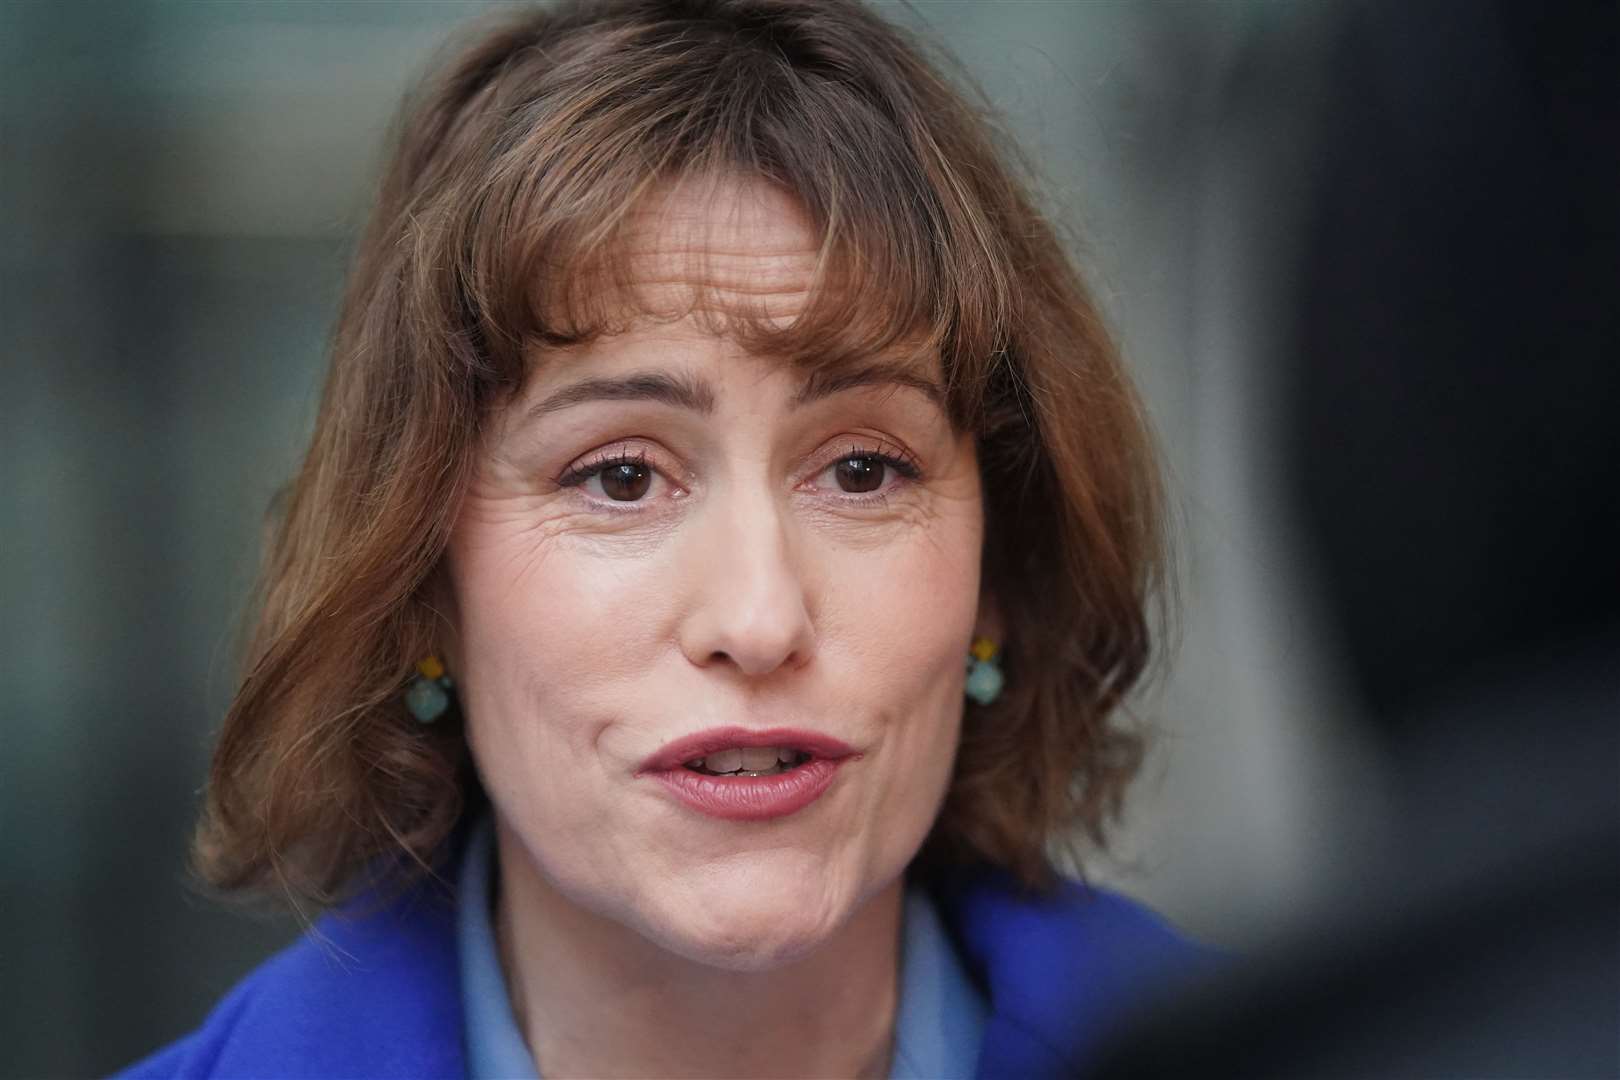 Victoria Atkins hinted an improved offer on pay and conditions could be on the table if the junior doctors called off the industrial action (Victoria Jones/PA)